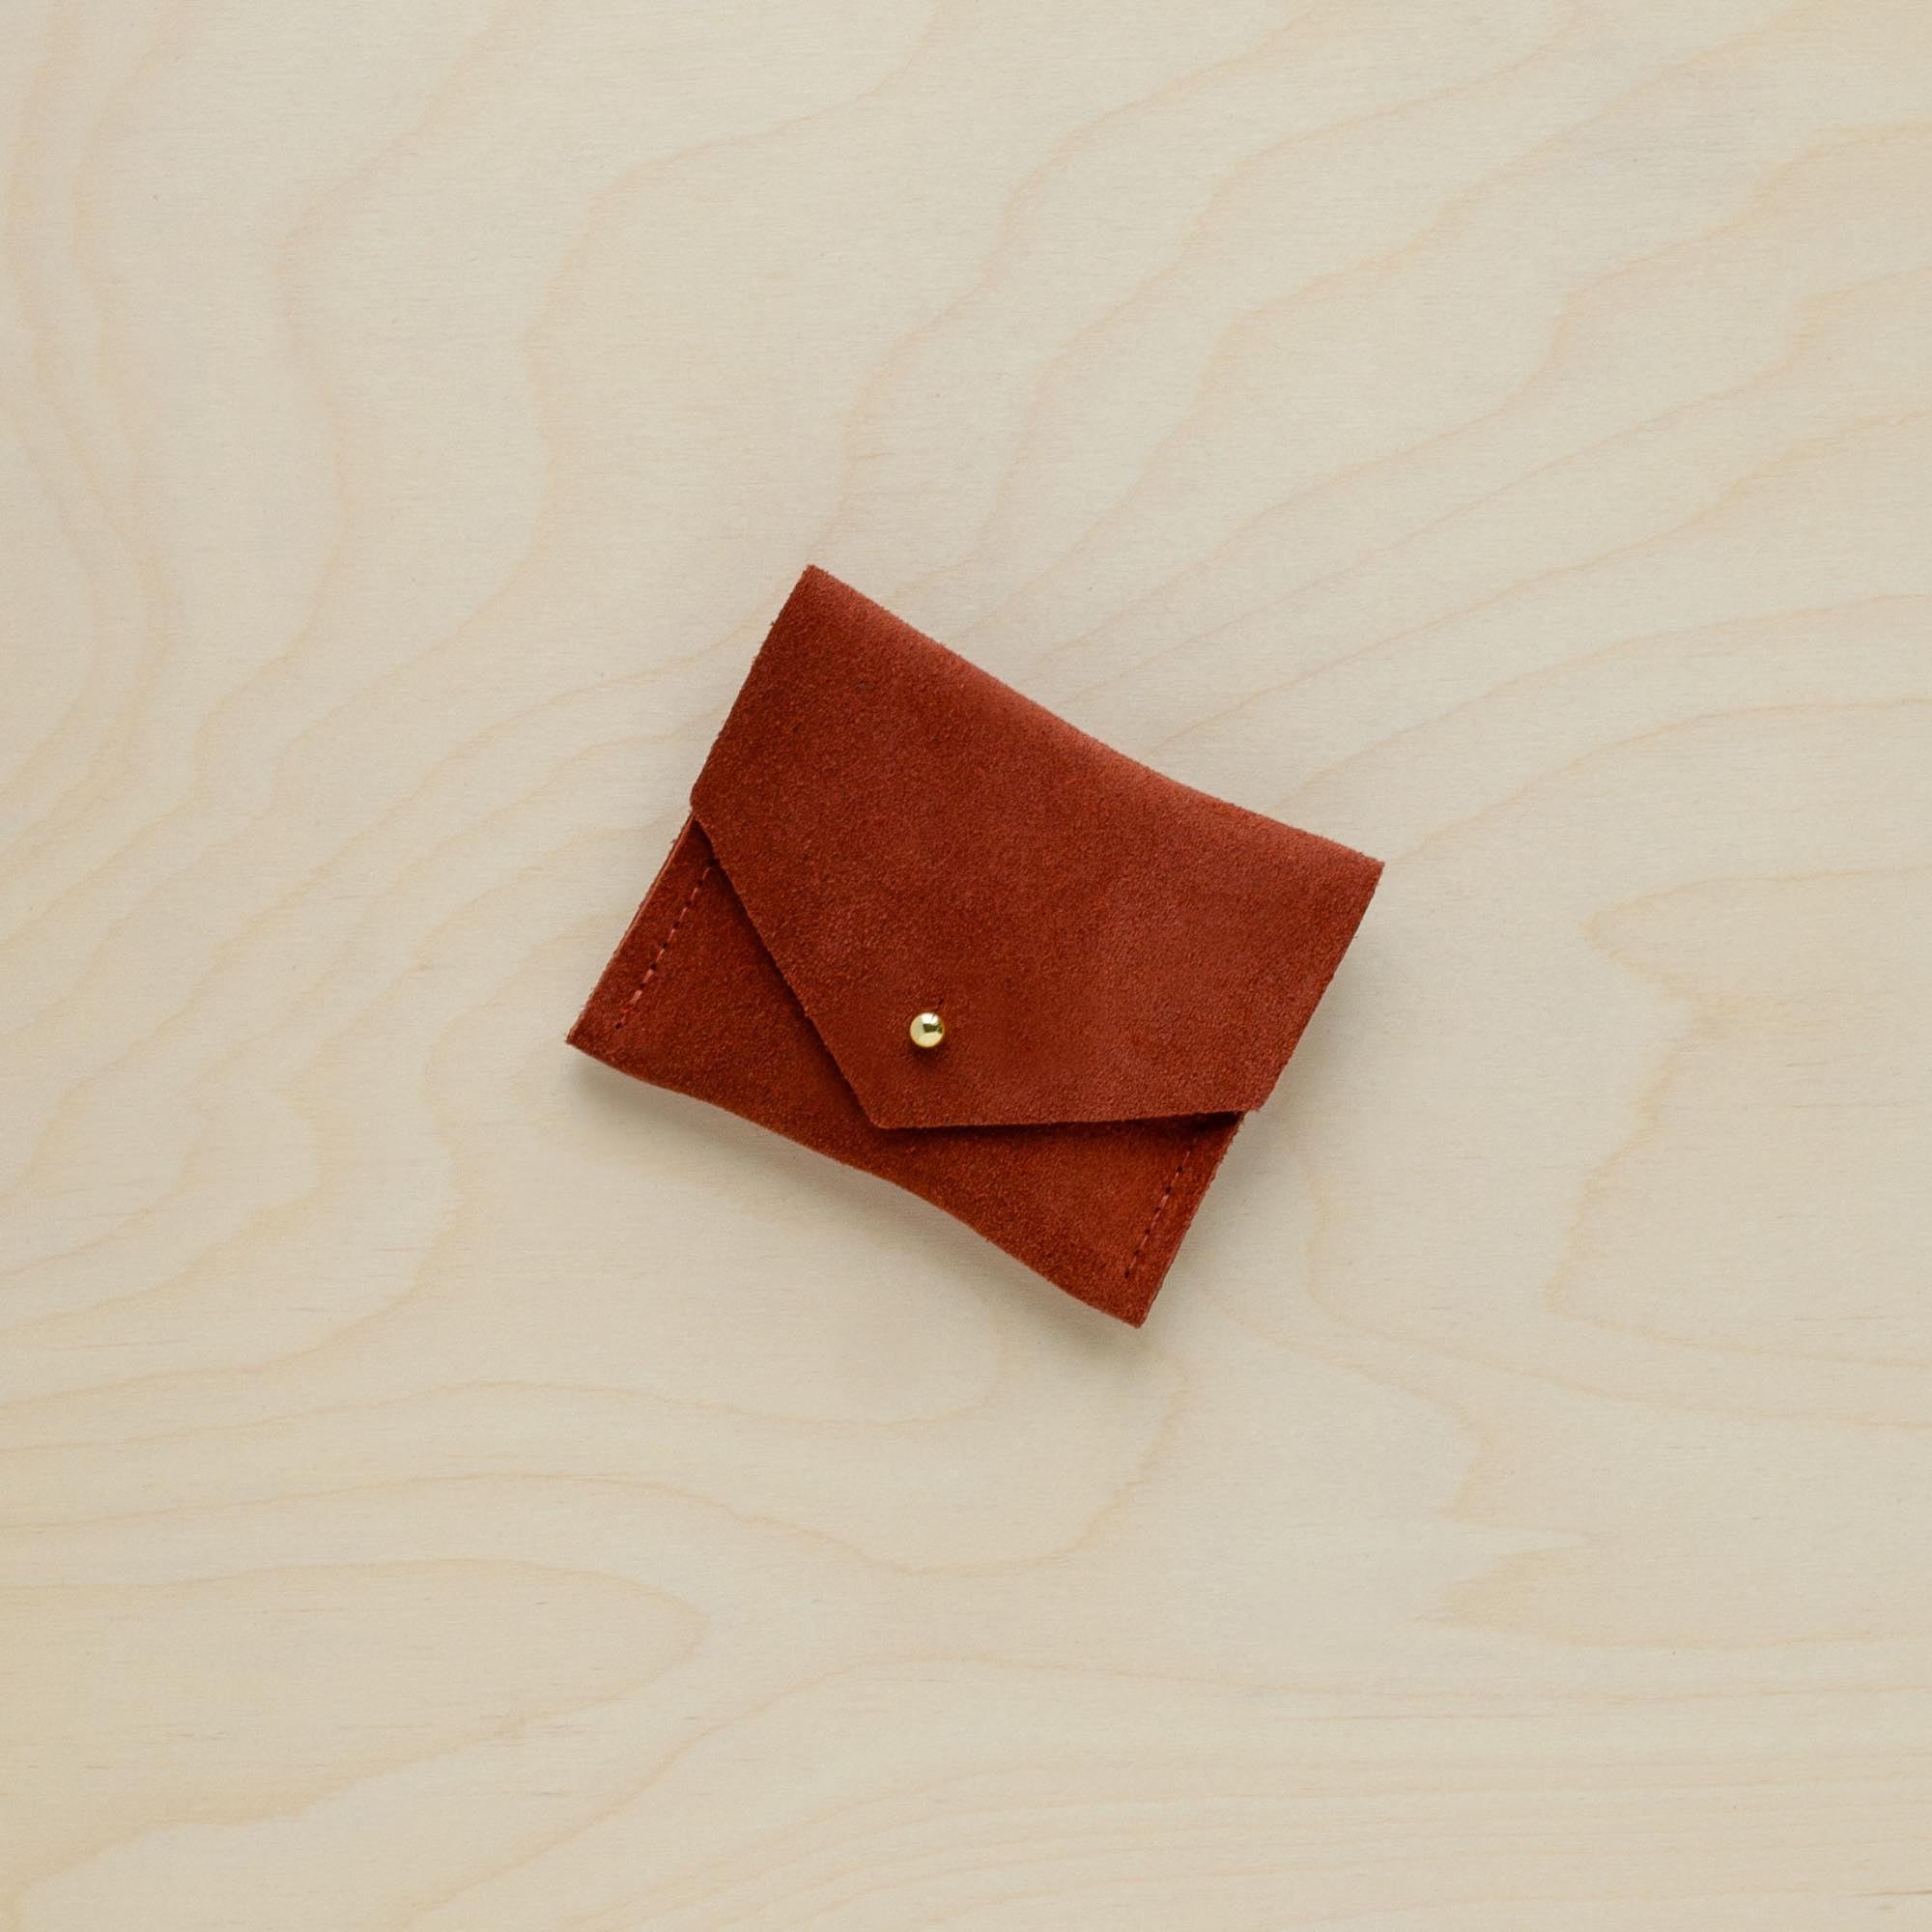 A suede Stitch Markers pouch in Chestnut brown. Complete with a stud for secure closing. 